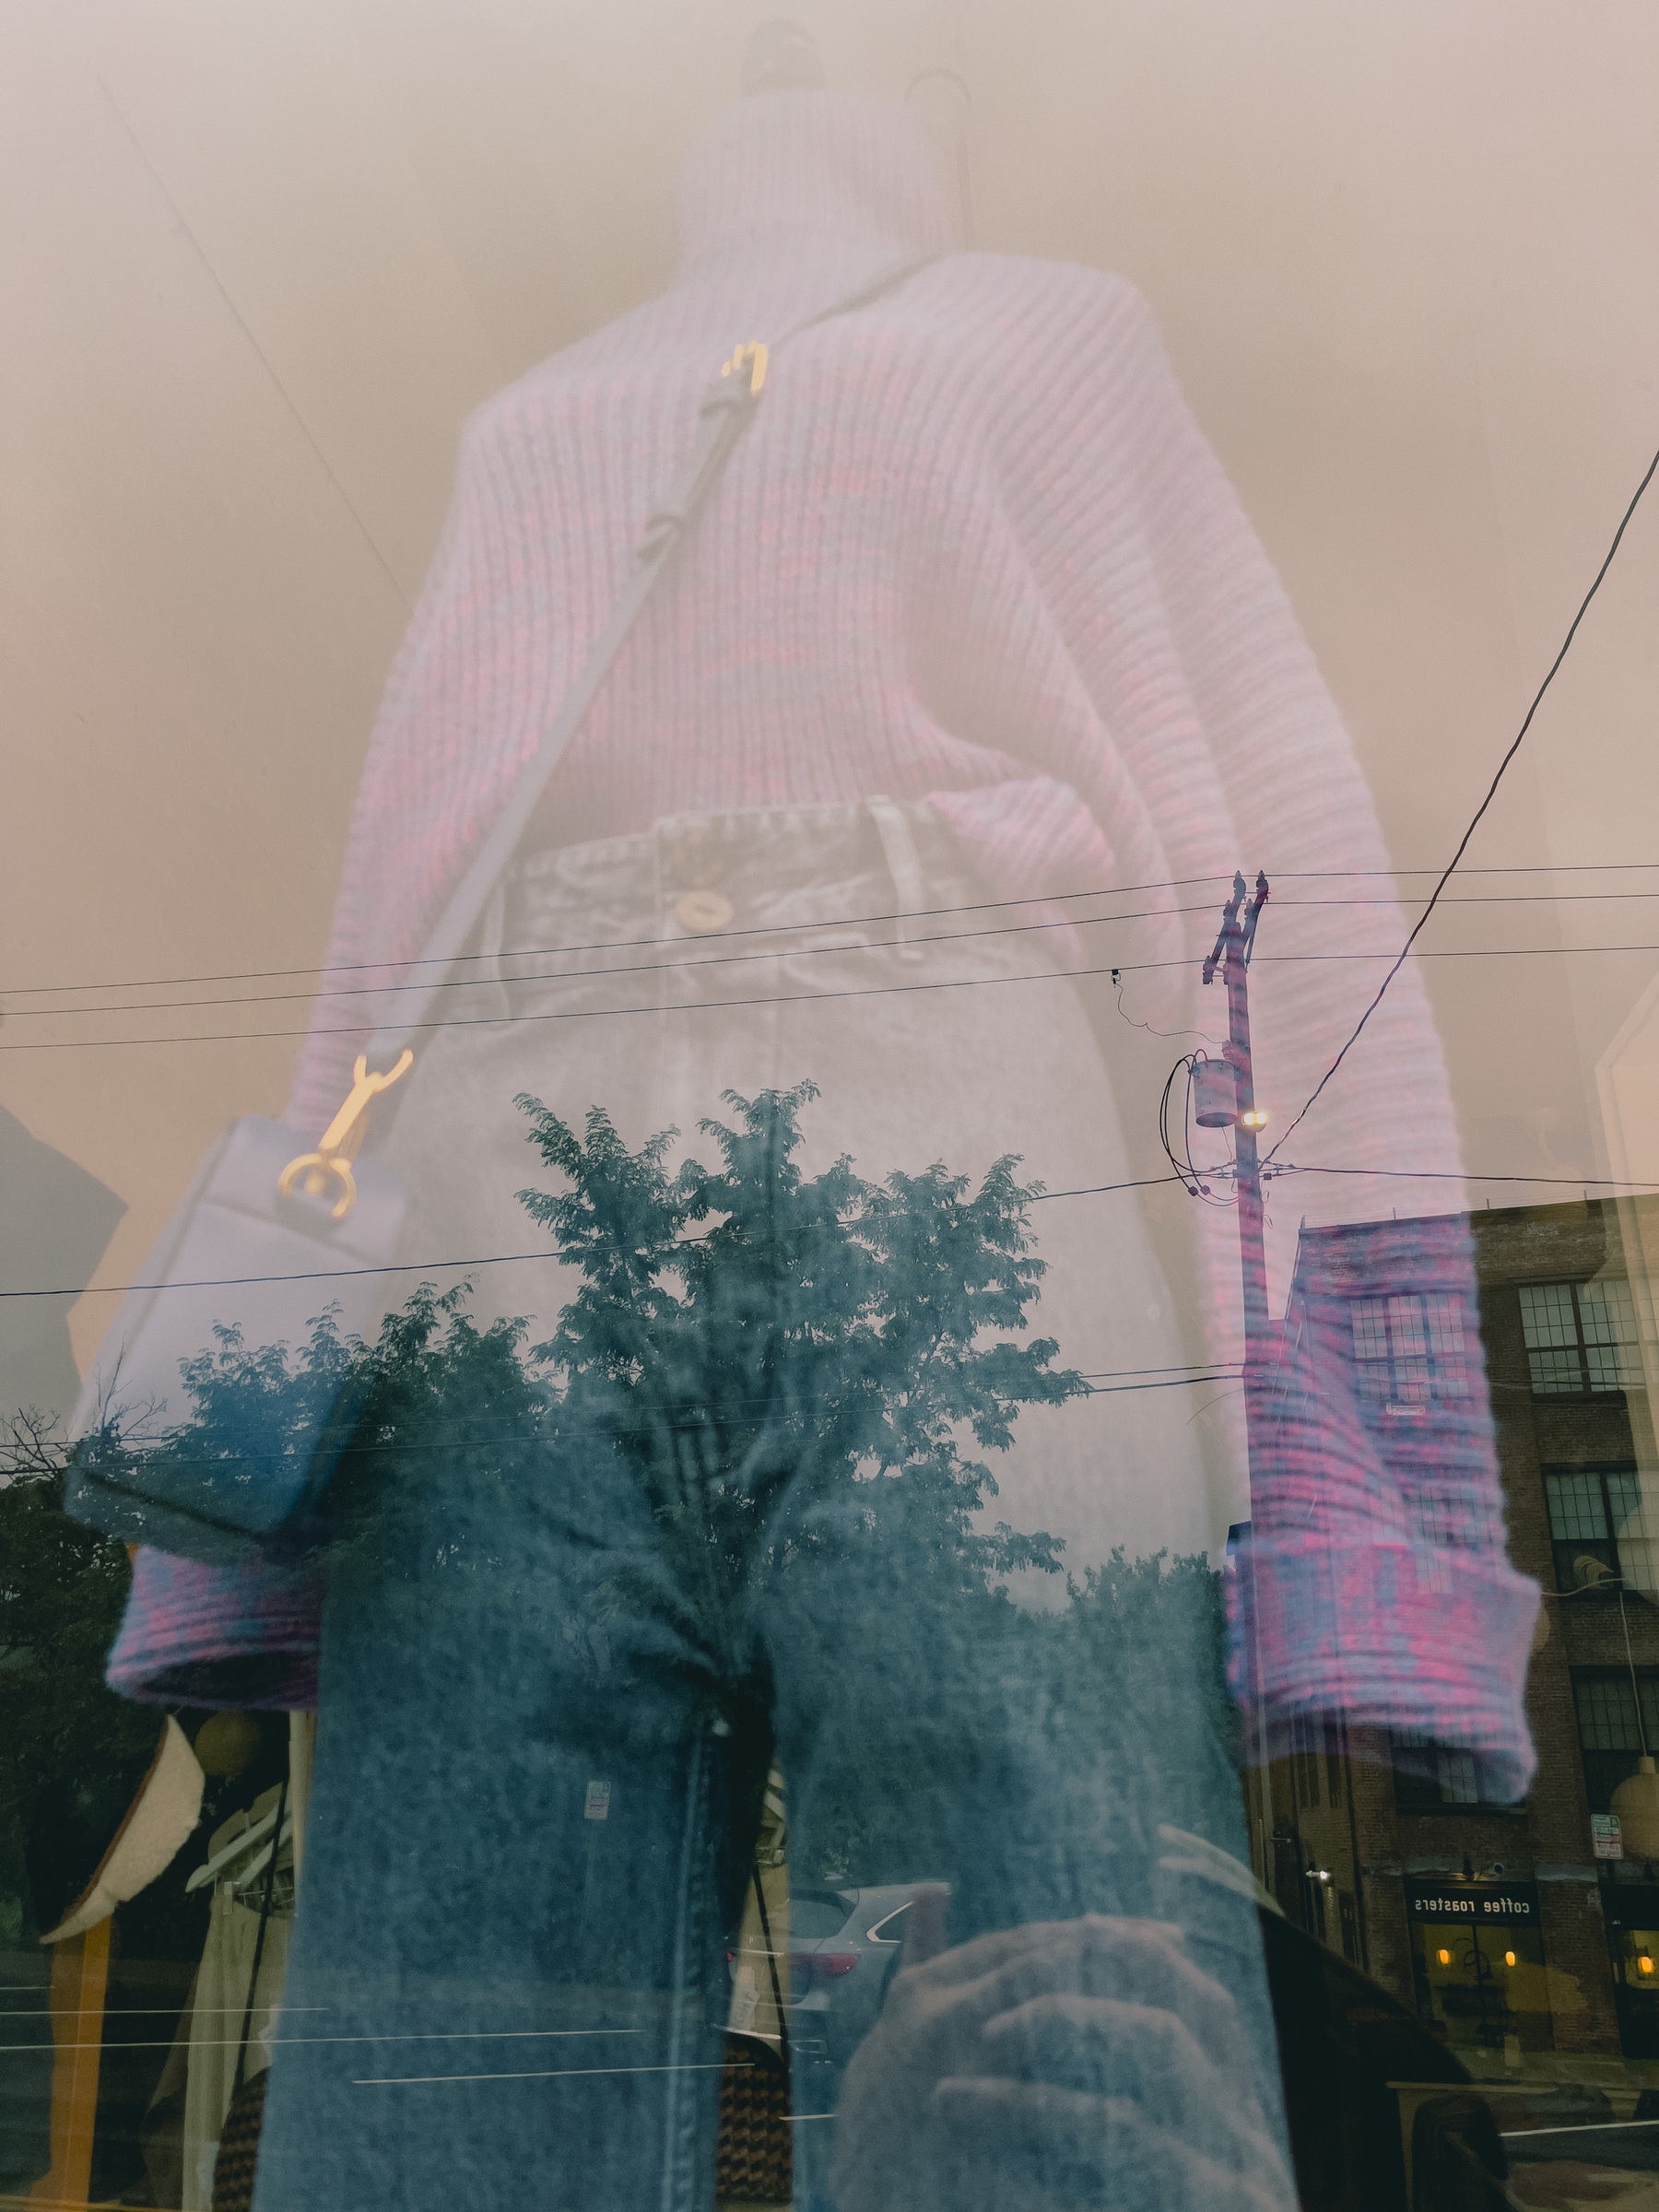 Purple/pink sweater, blue jeans, purple/pink handbag combo on mannequin in shop window. Sky, trees, building reflections layered overtop.